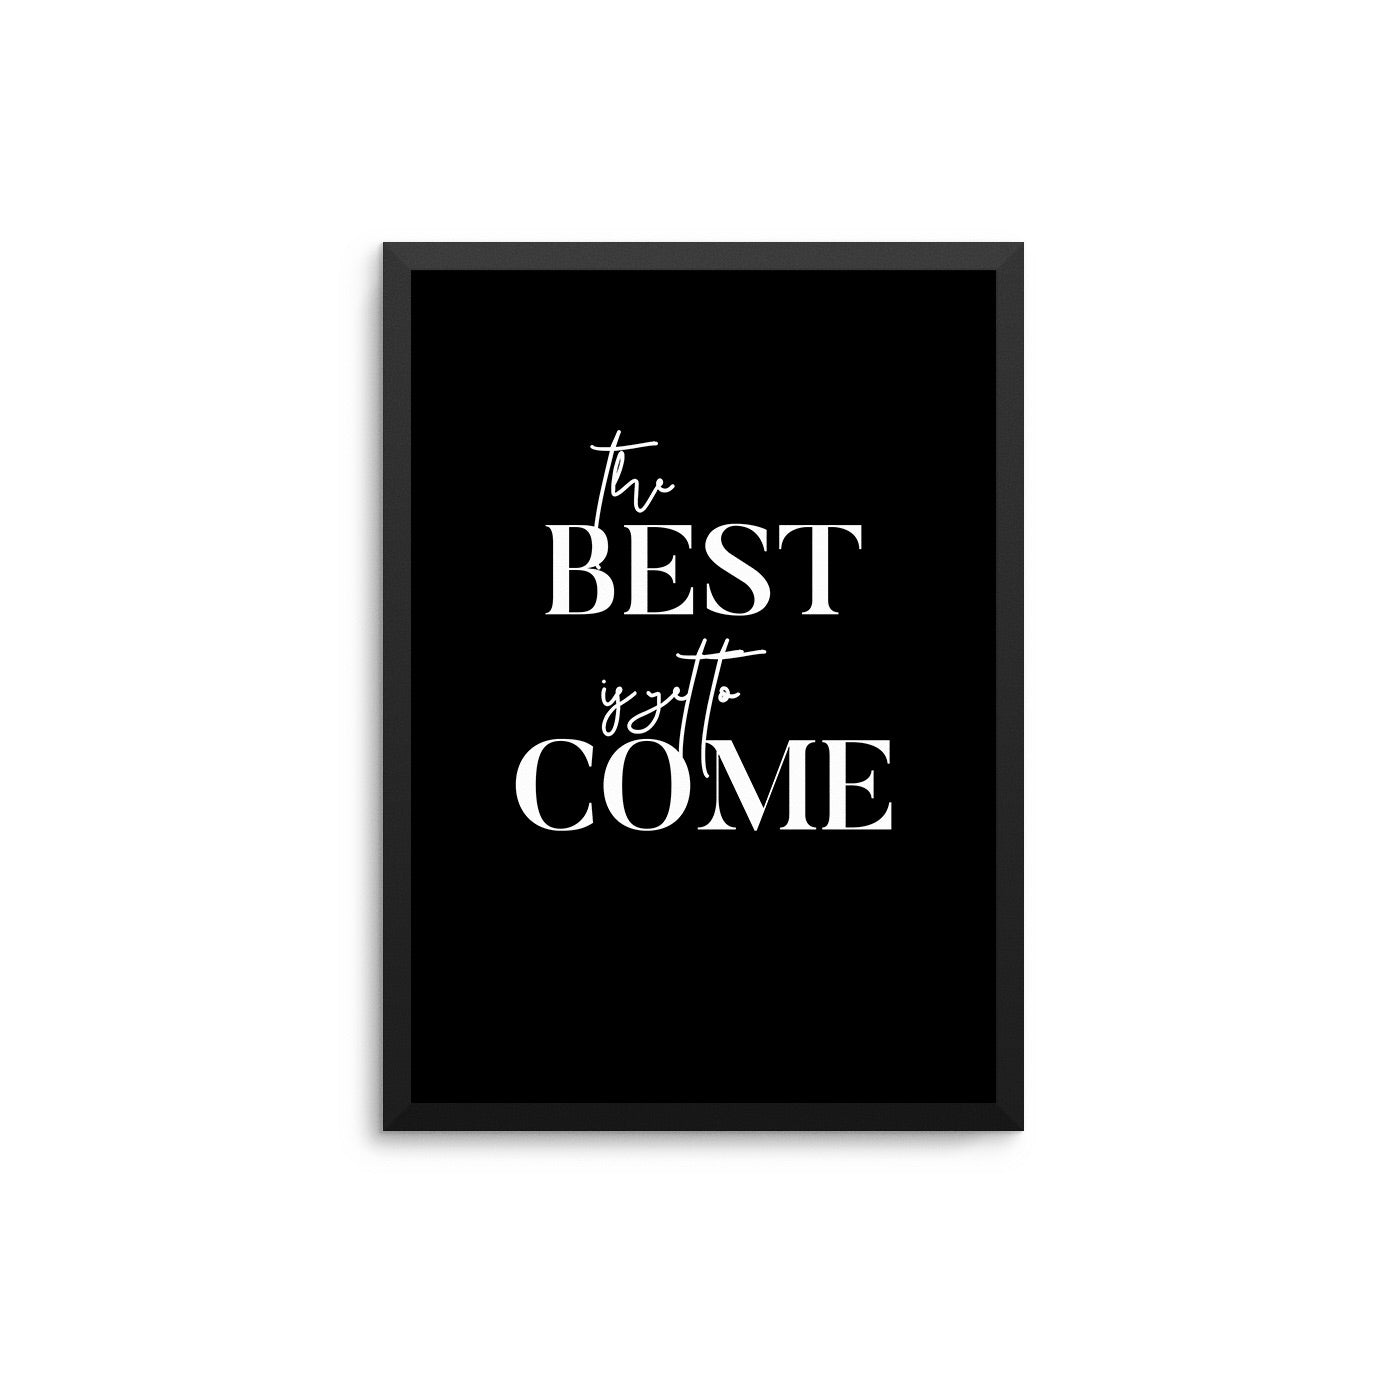 The Best Is Yet To Come - D'Luxe Prints